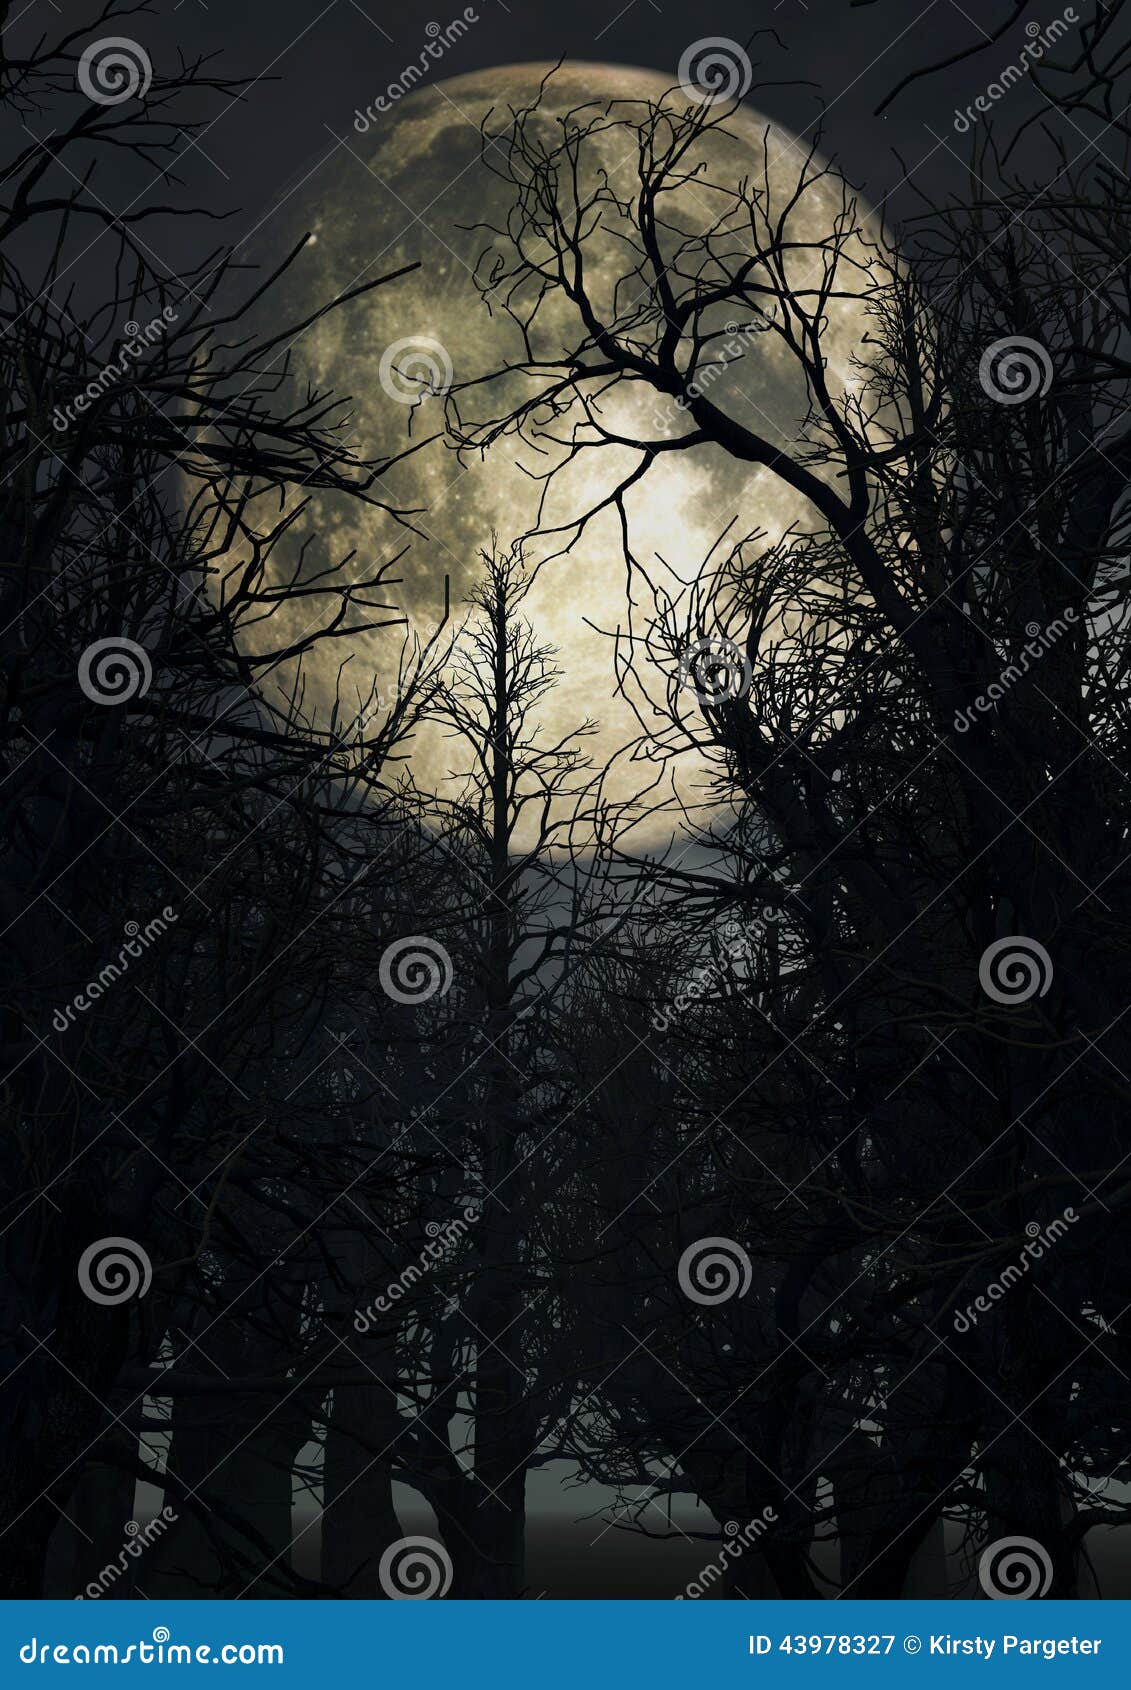 moonlit sky with spooky trees